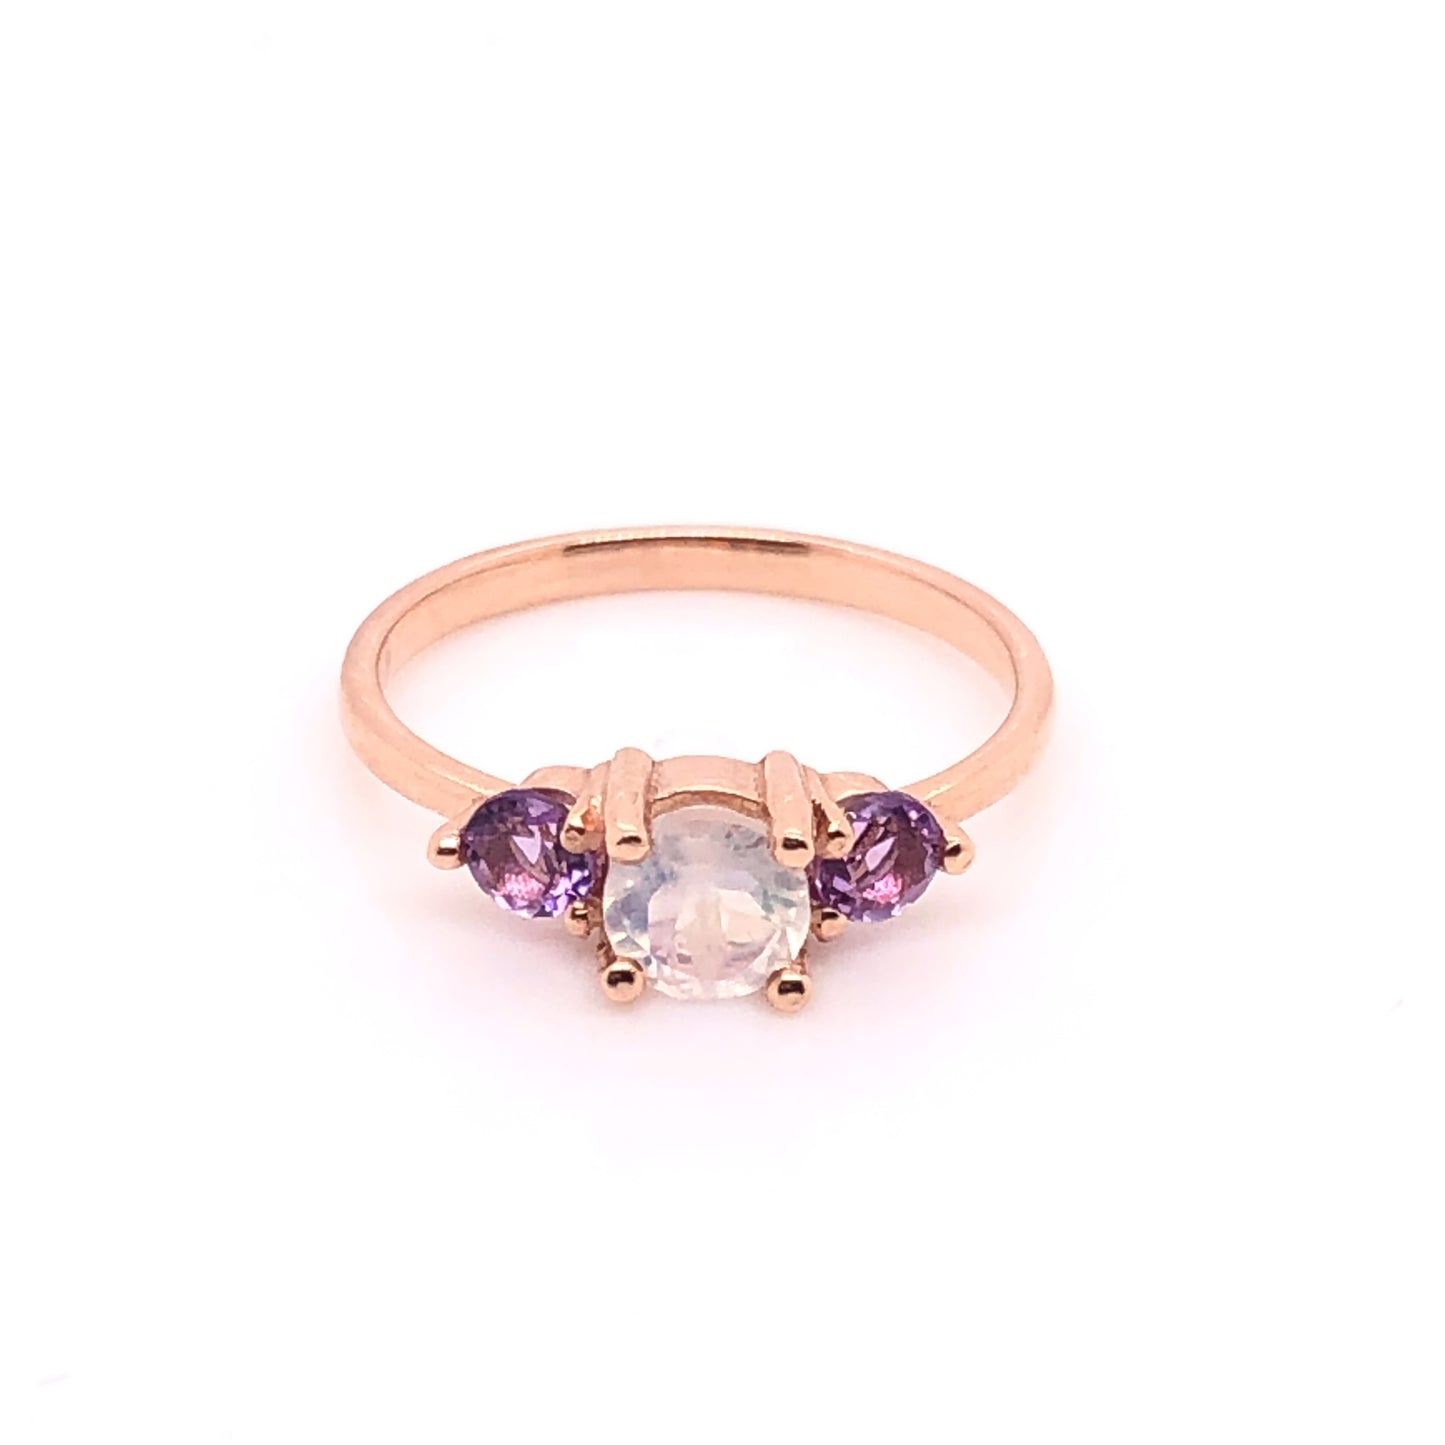 IMMEDIATE DELIVERY / Moonstone Ring with Amethysts / 14k Rose Gold / Size 4.5